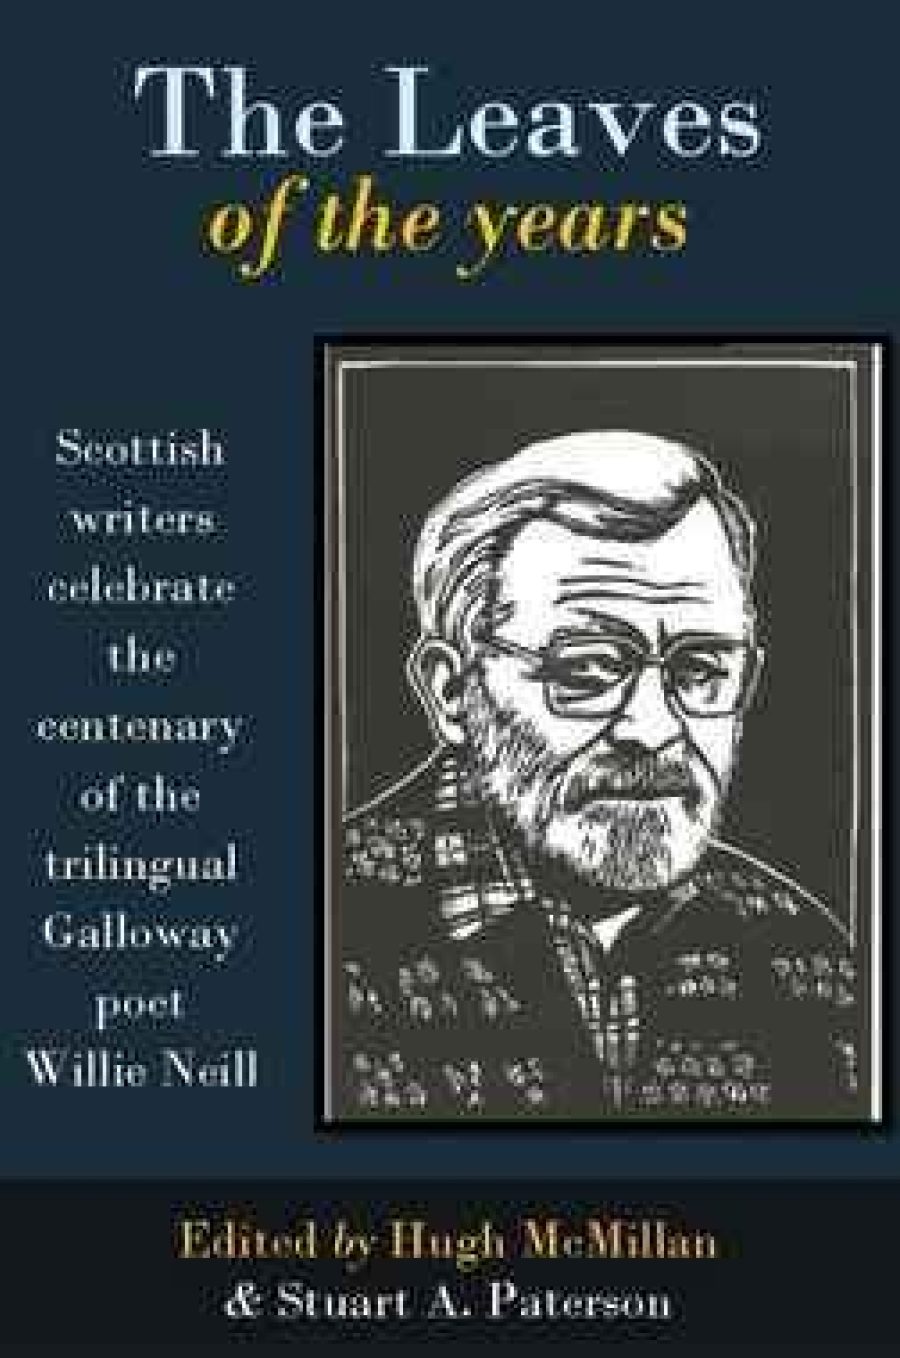 Book cover of 'The Leaves of the years'.